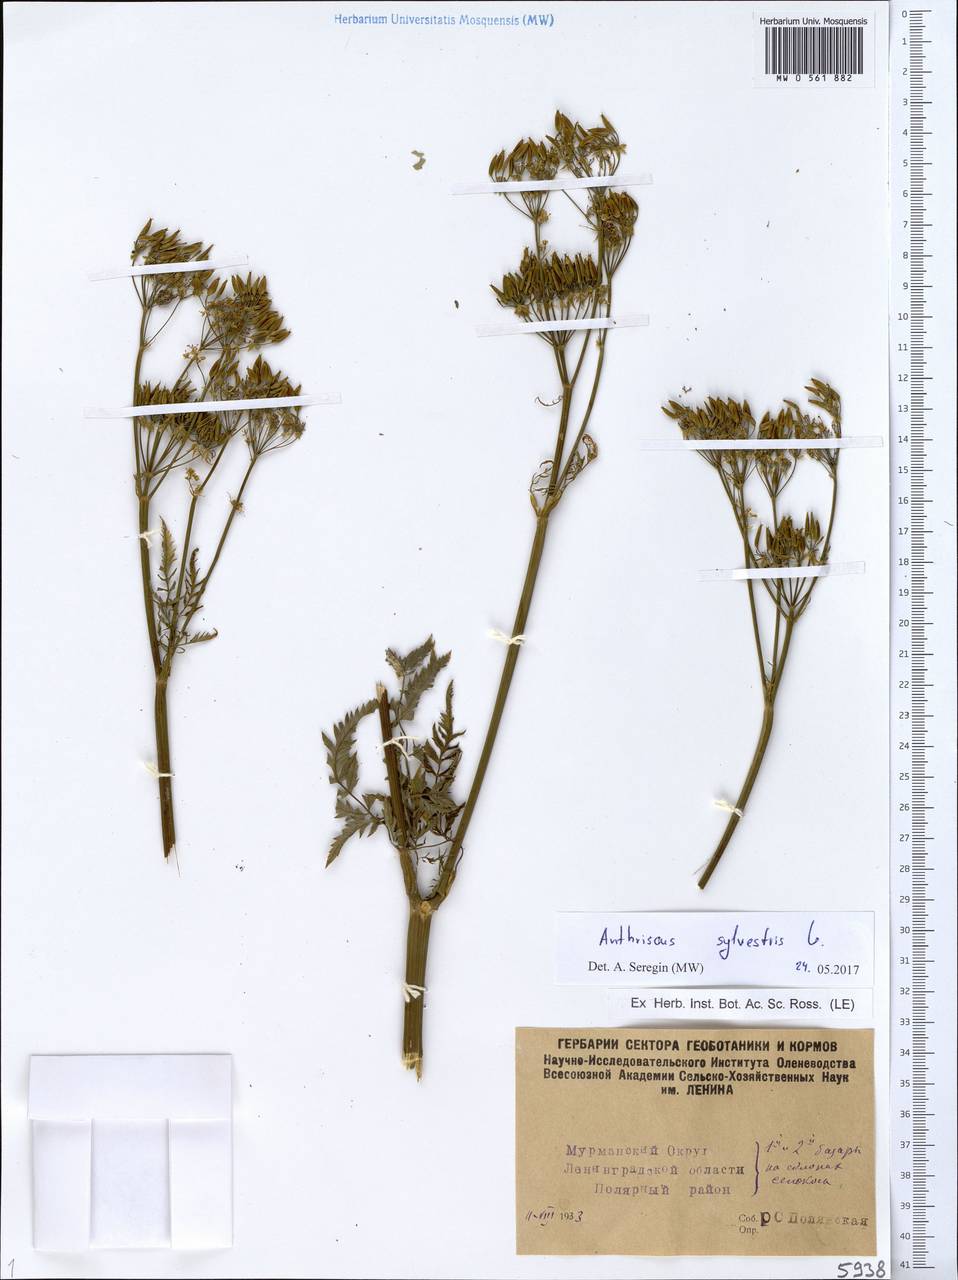 Anthriscus sylvestris, Eastern Europe, Northern region (E1) (Russia)